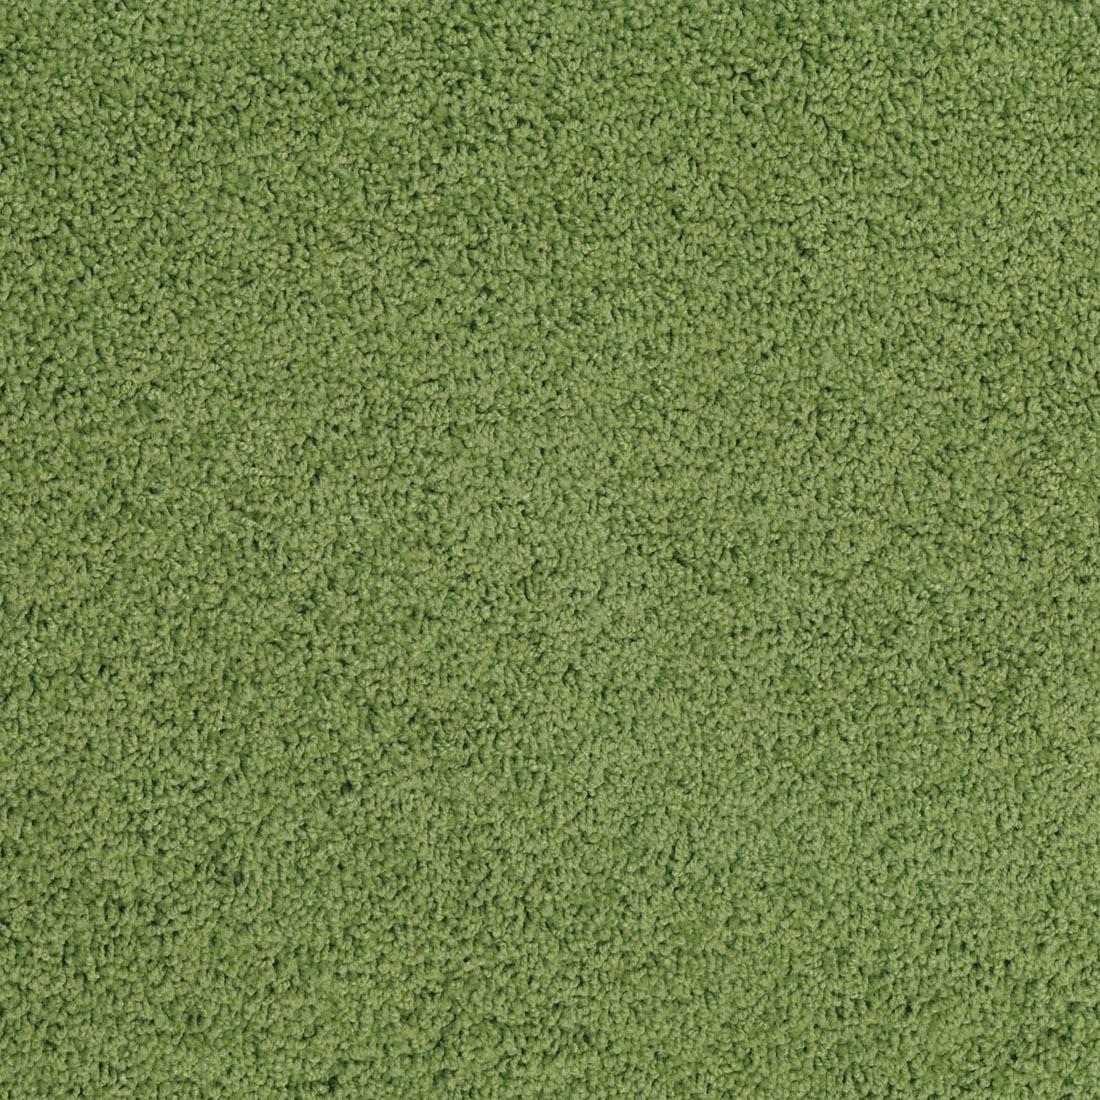 Grass Green Color Swatch of the KIDply Soft Solid Rug by Carpets For Kids